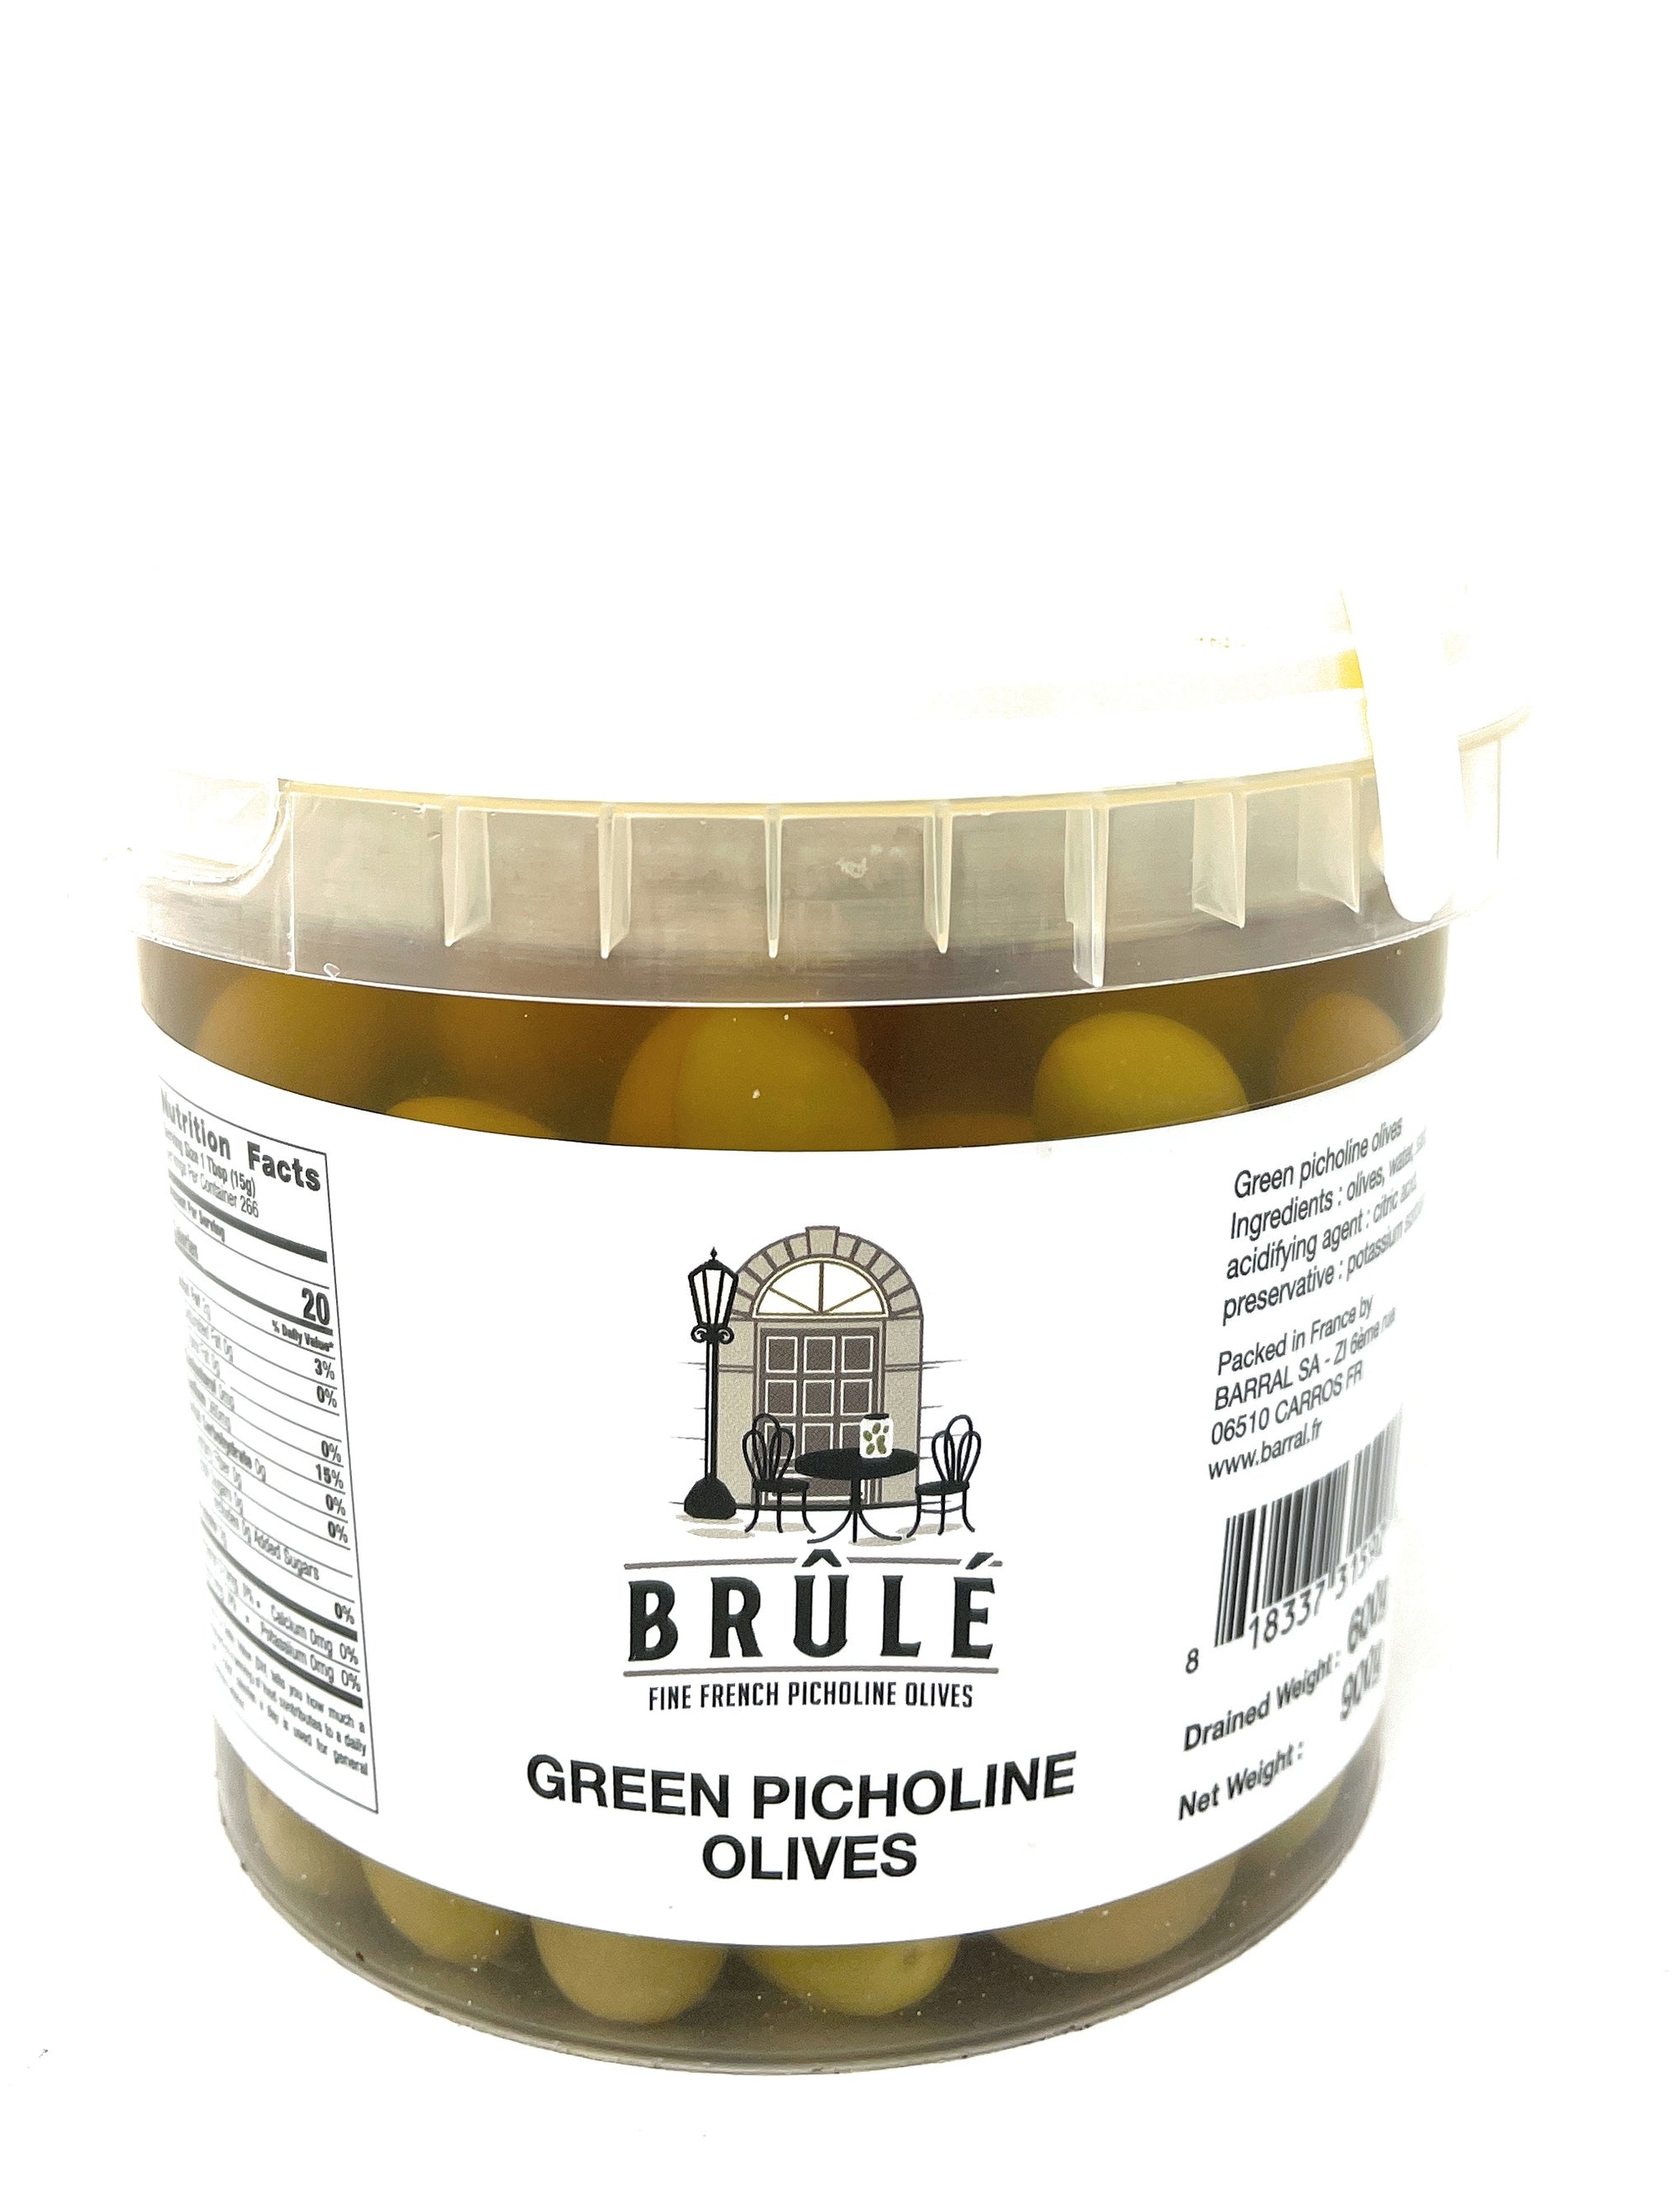 Fine French Green Picholine Cocktail Martini Olives   2 POUNDS in an Imported Tub